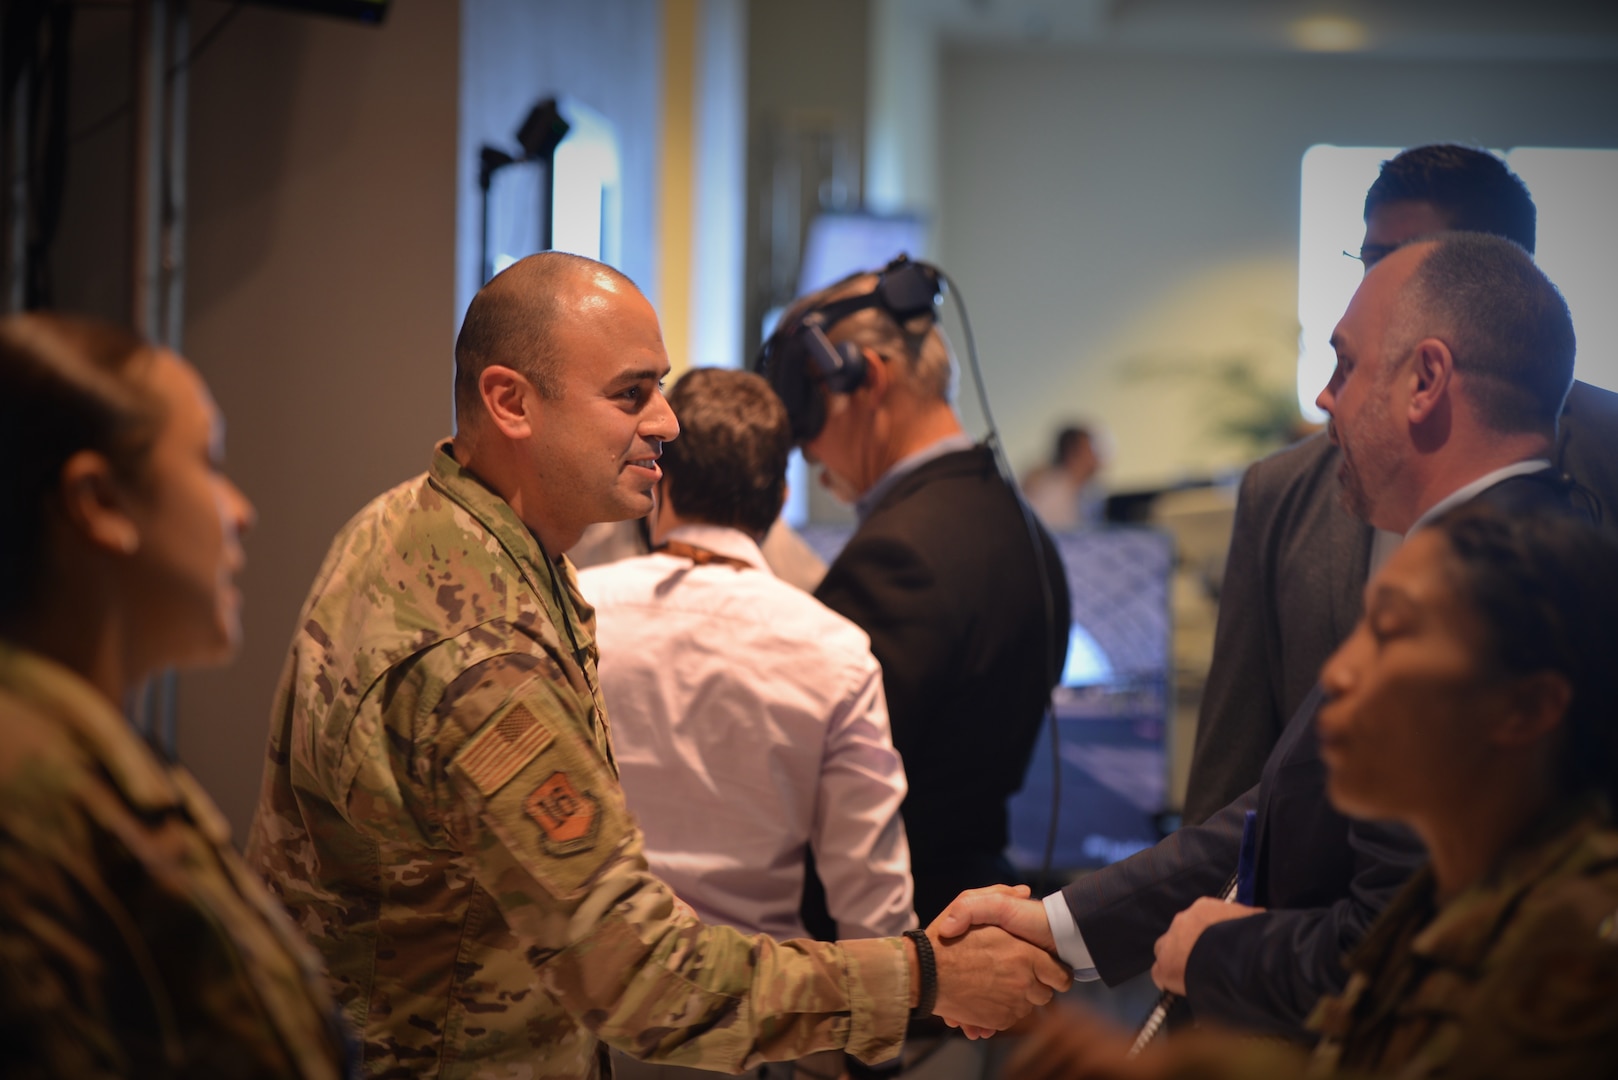 Airman shakes hands with a visitor at a booth.